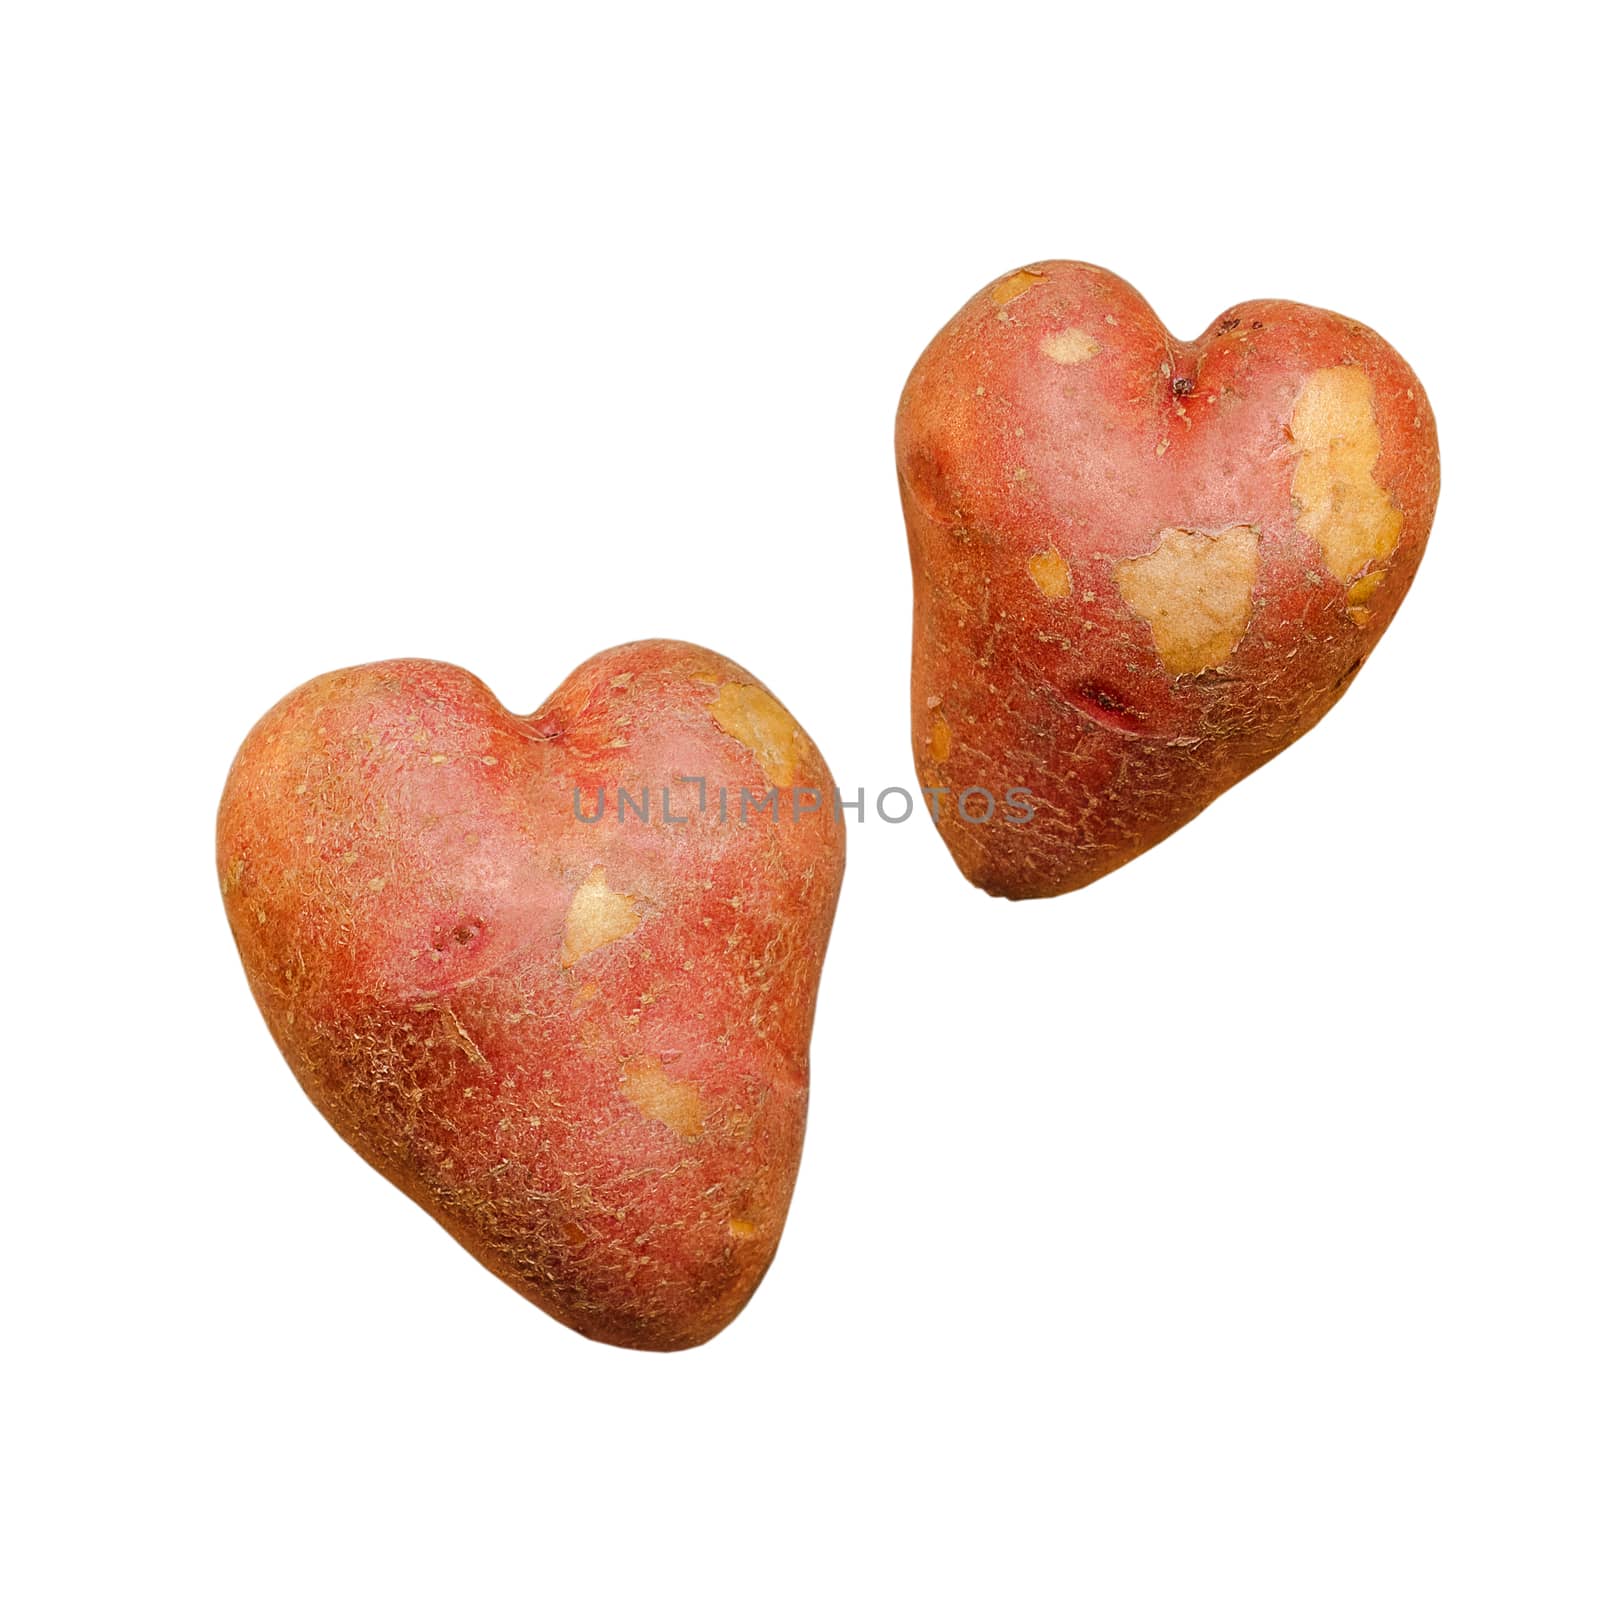 Two pink potato similar to heart, lying on a white background. Isolated.